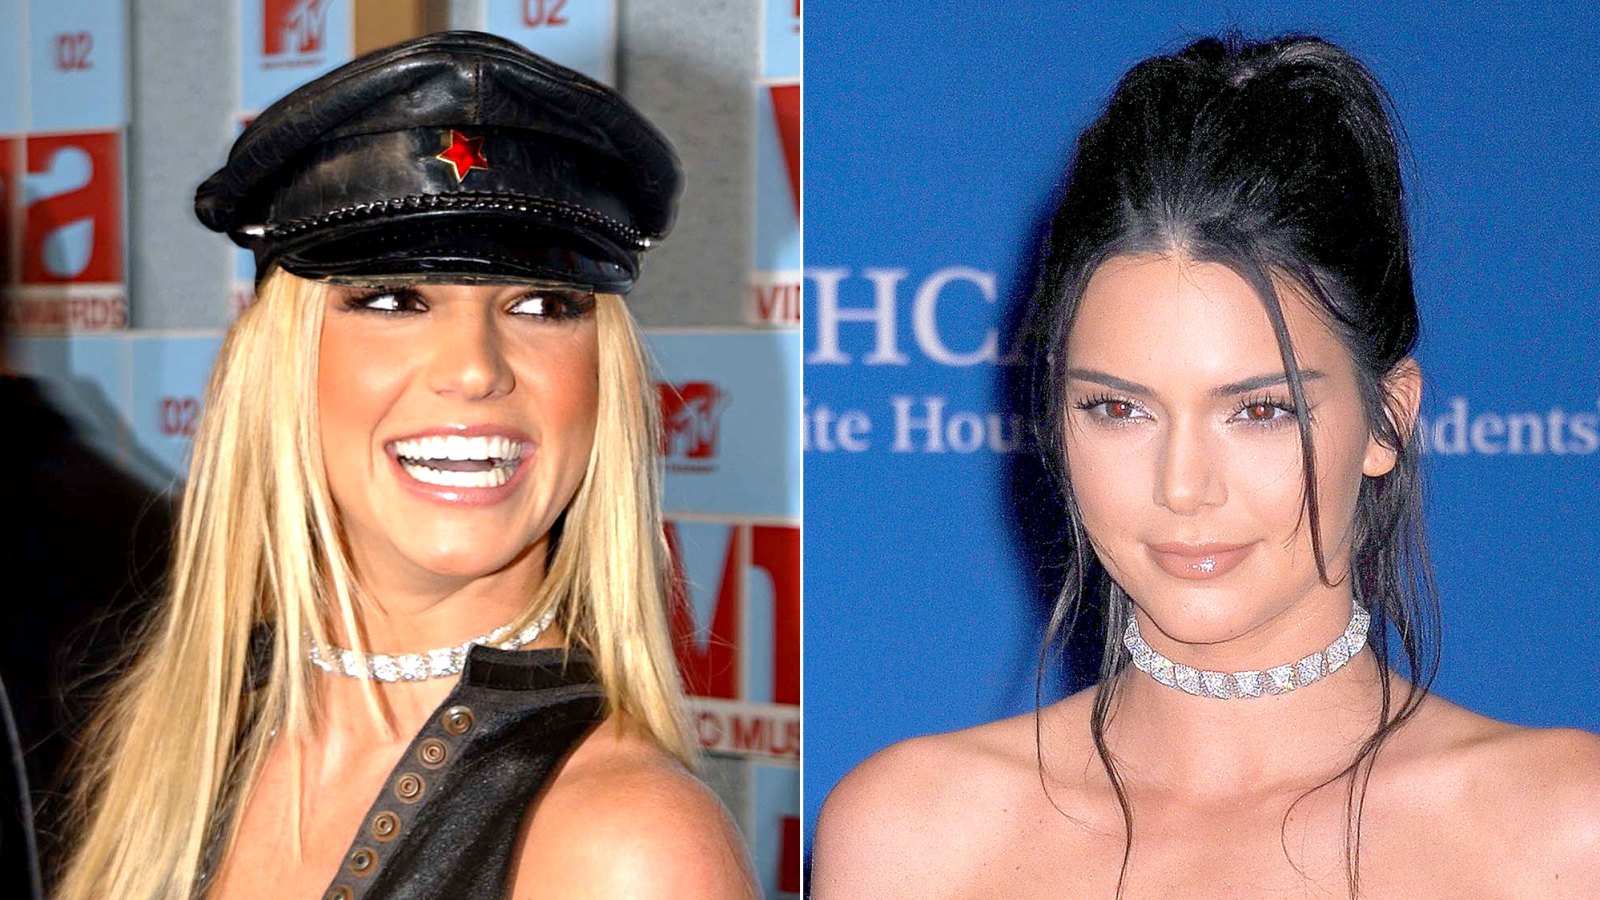 Britney spears kendall jenner 9b77909f 4be6 4590 97c7 39ead960ca91